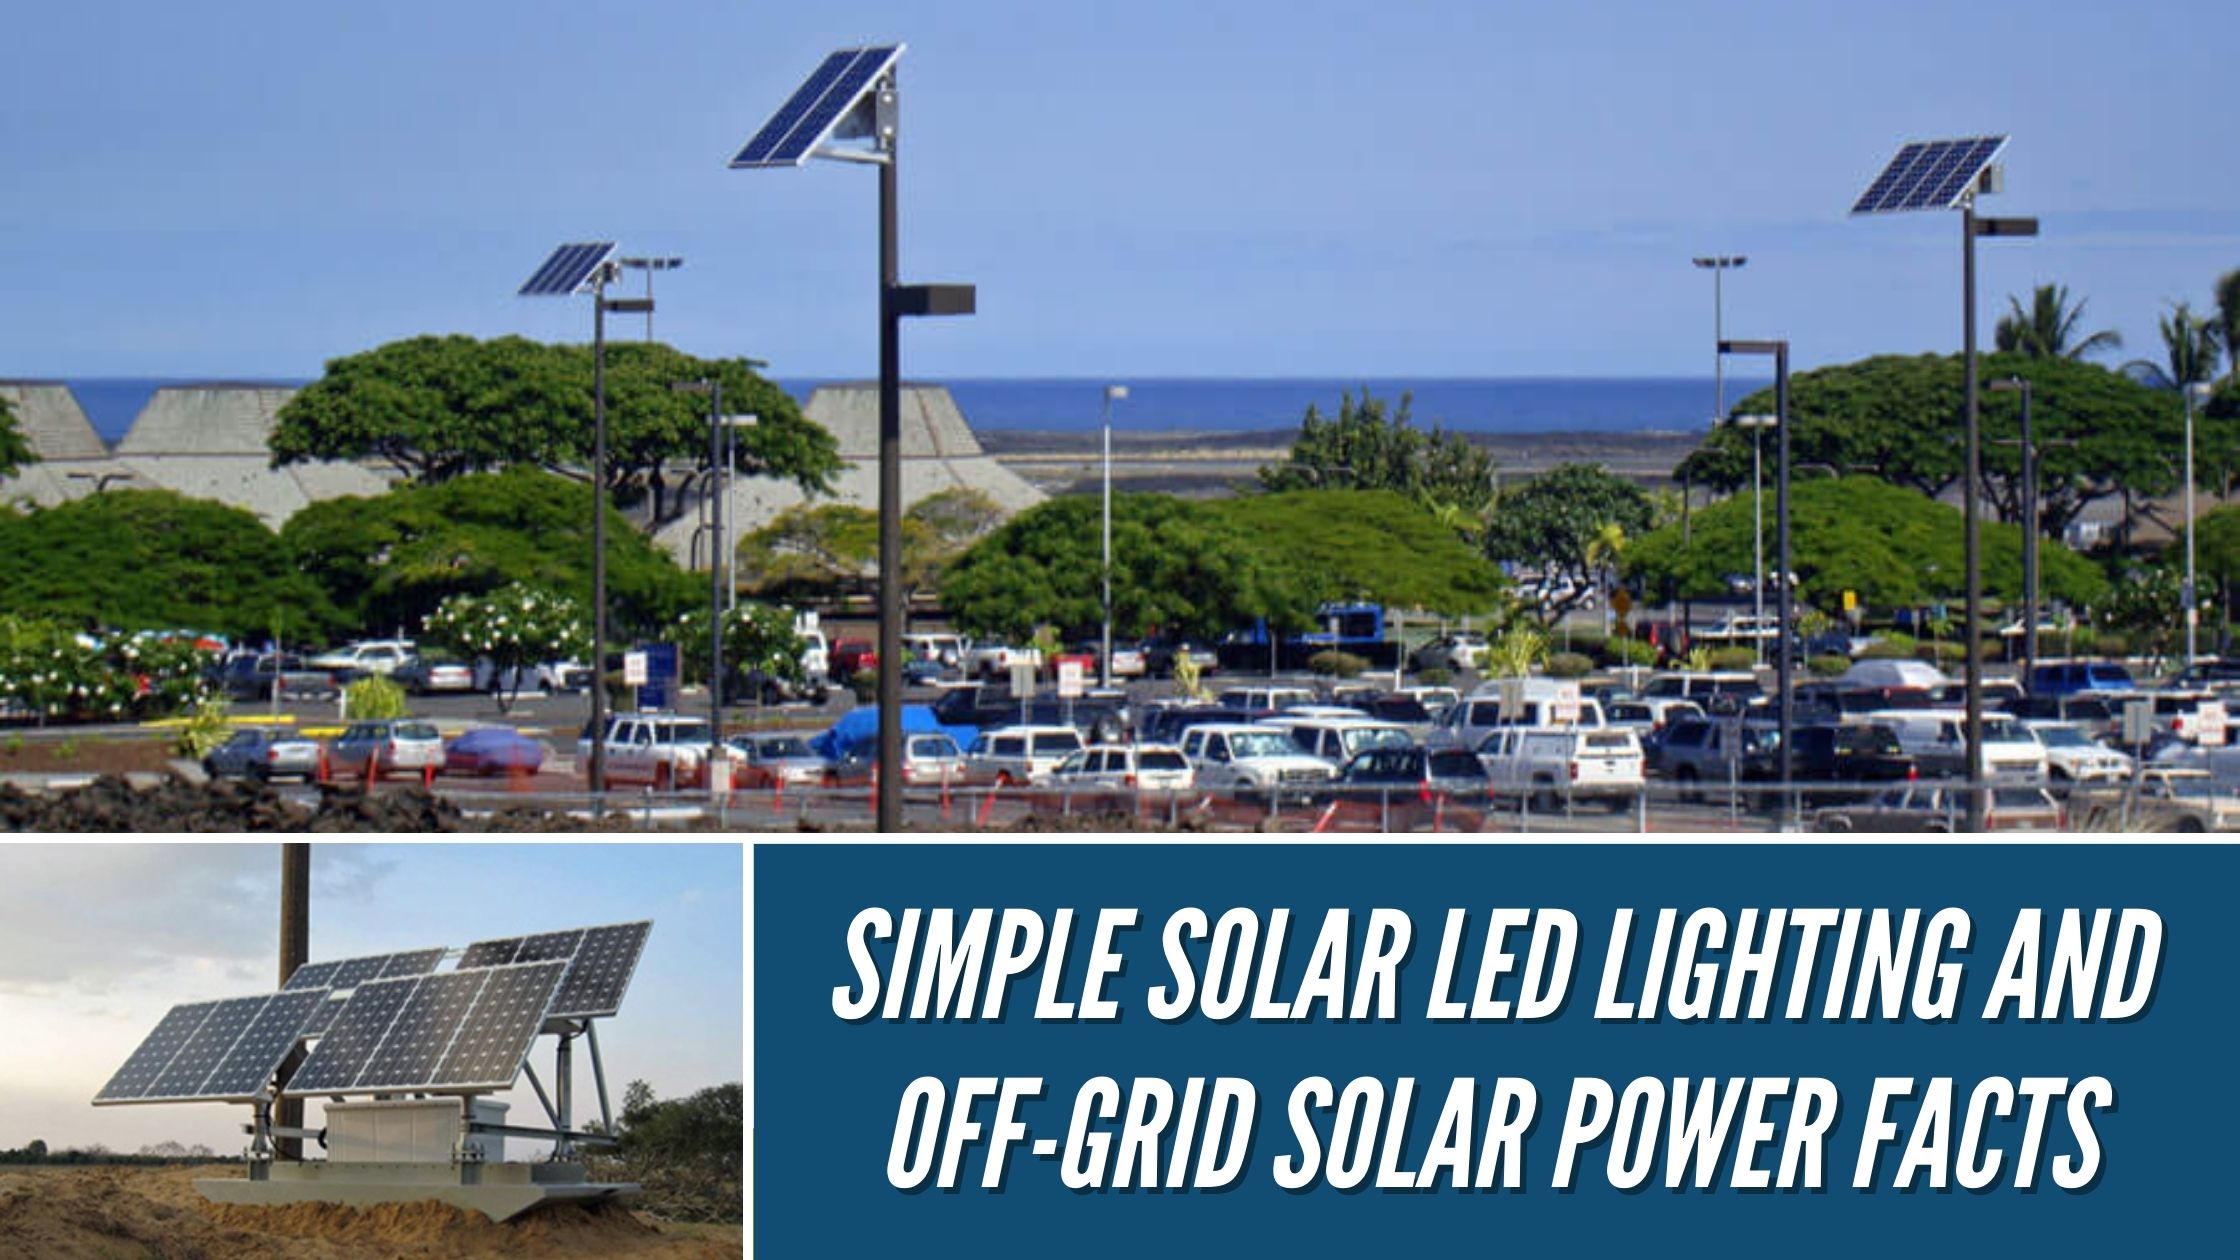 Simple Solar LED Lighting and Off-Grid Solar Power Facts